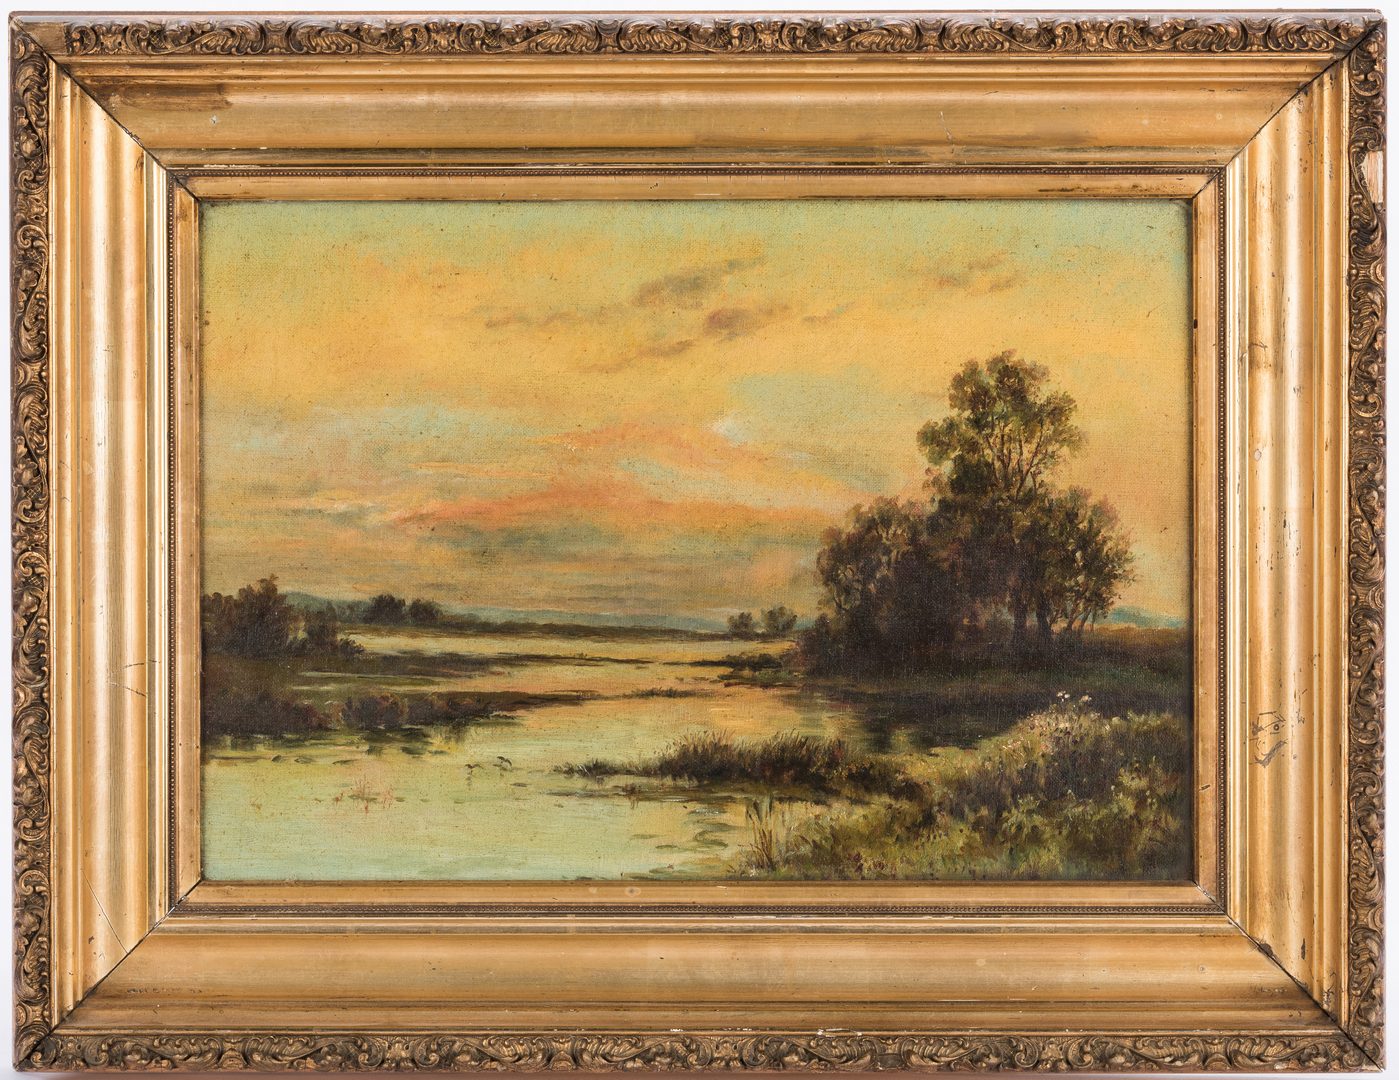 Lot 808: 3 small Landscapes in giltwood frames